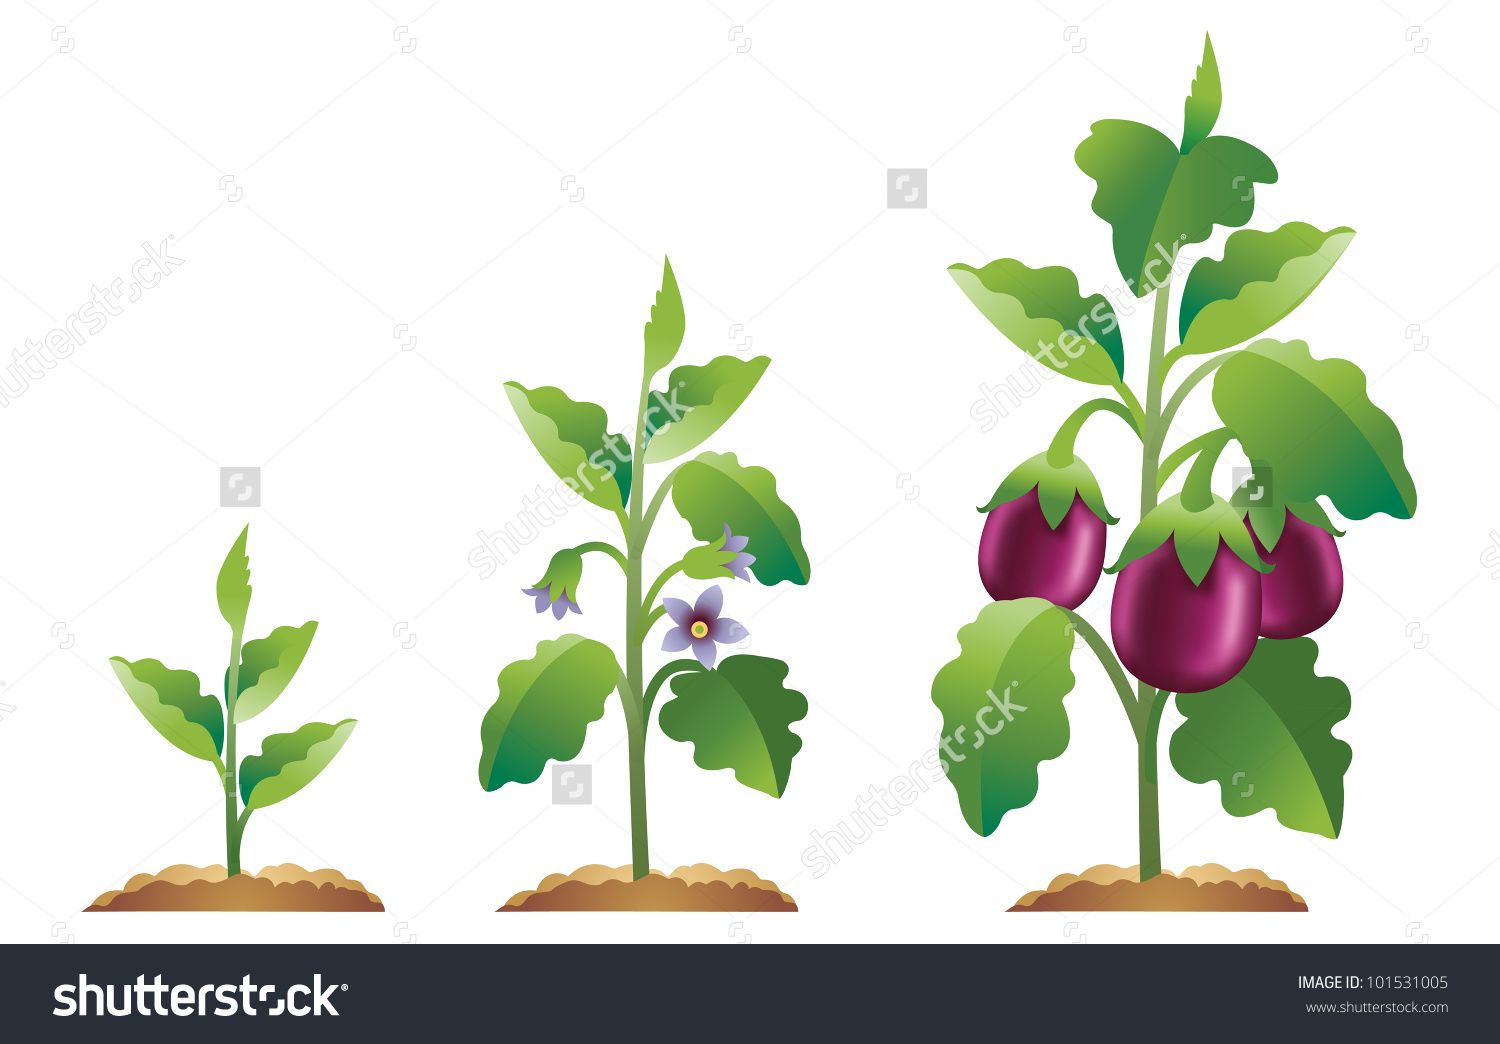 Eggplant Growth Stages From A Small Plant To Fully Grown